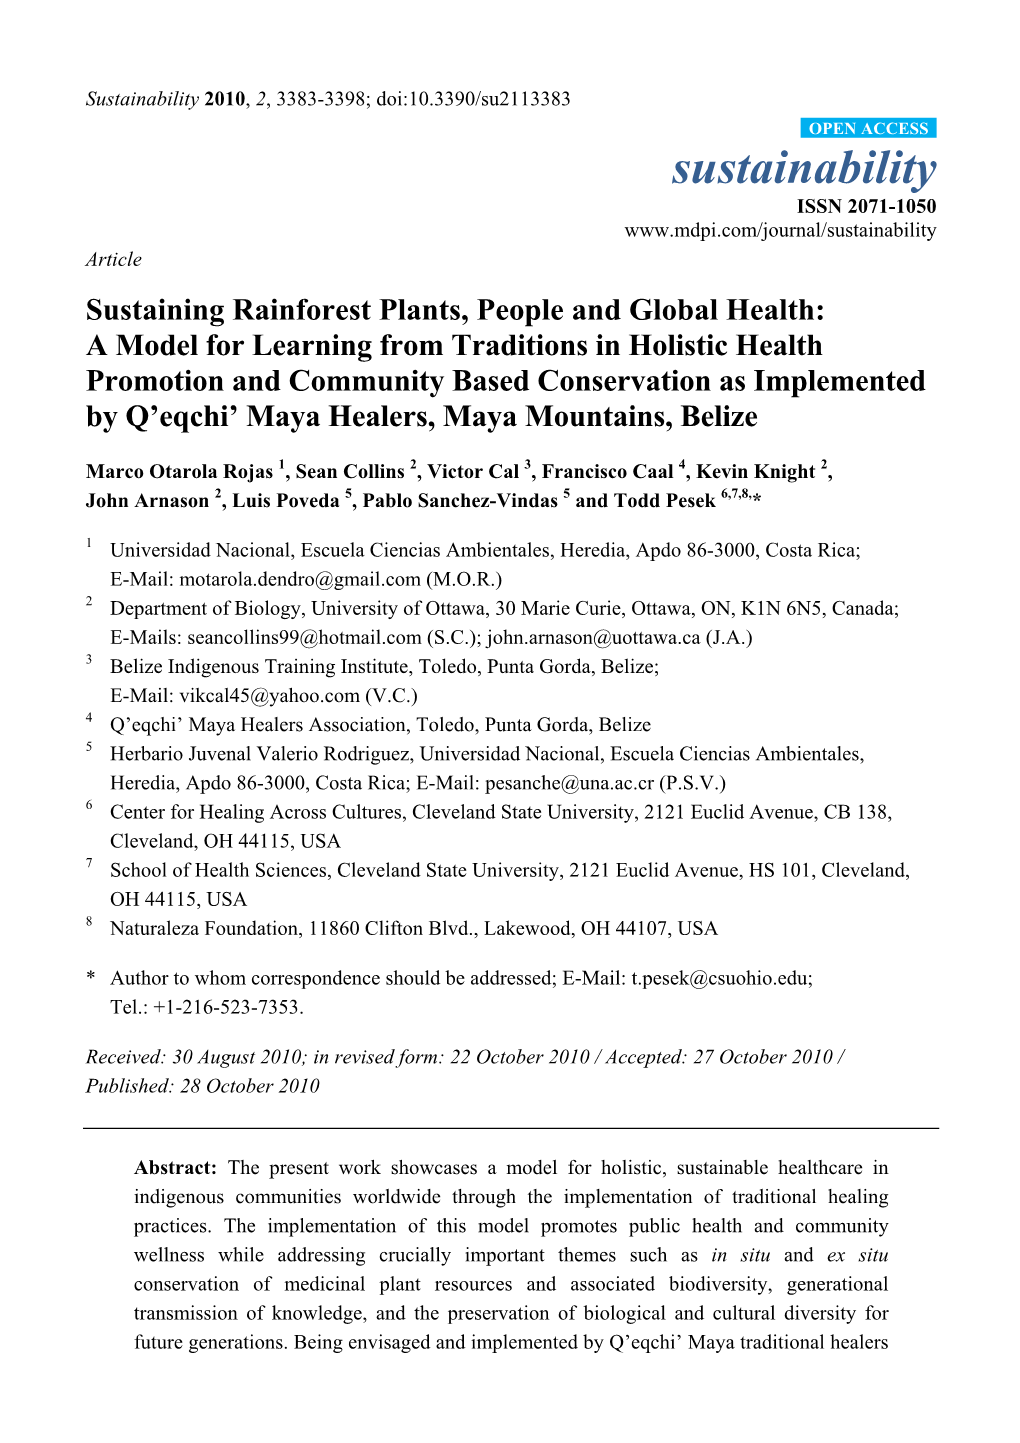 Sustaining Rainforest Plants, People and Global Health: a Model For